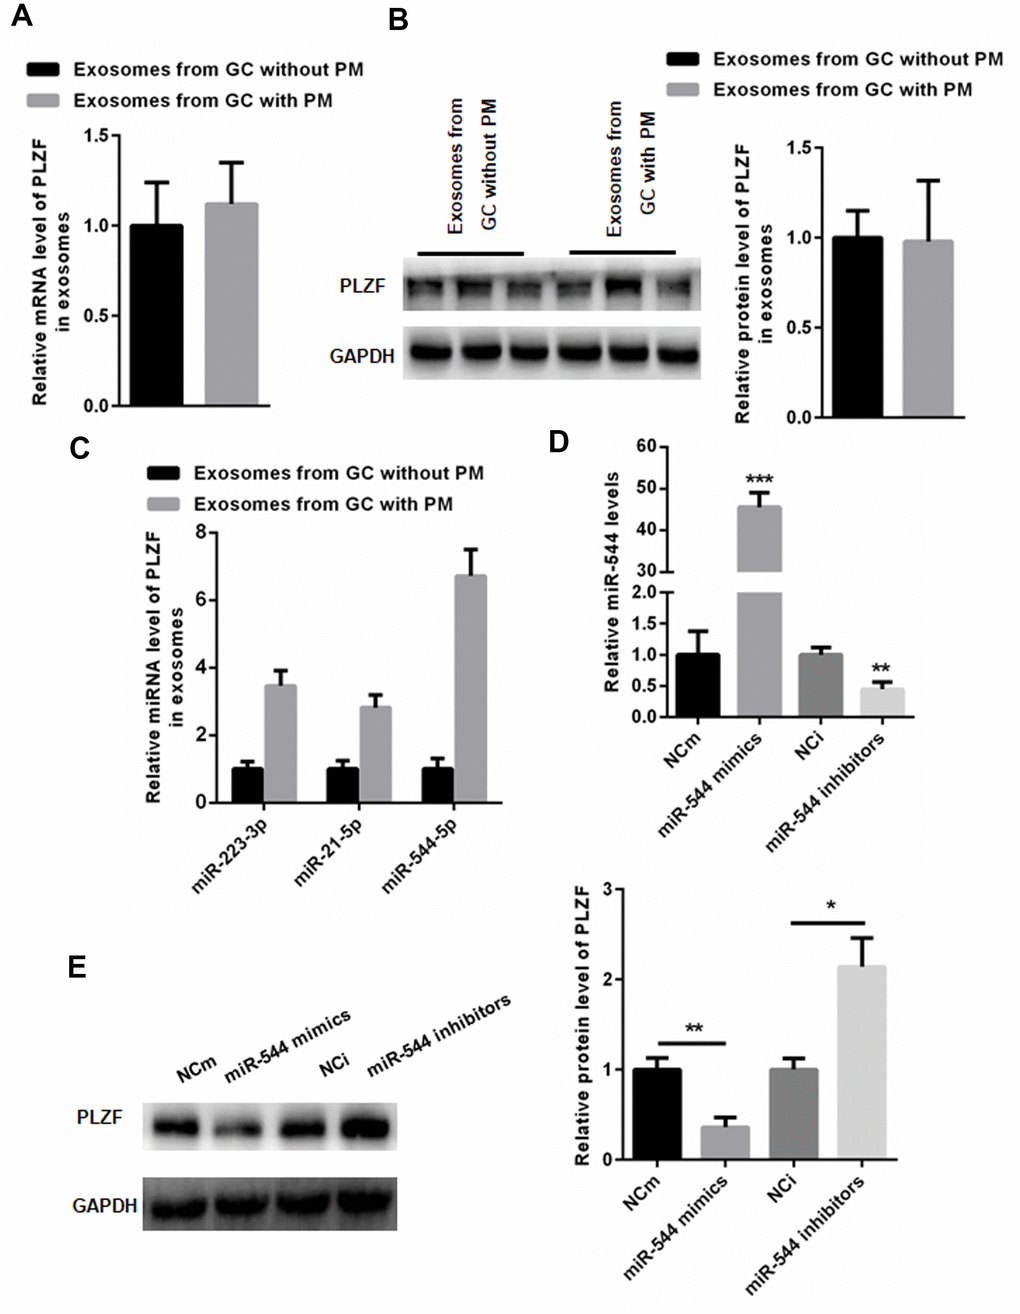 miR-544 from GC-derived EVs of PM patients reduces PLZF expression in HMrSV5 cells. (A) mRNA and (B) protein expression of PLZF in EVs isolated from GC patients with and without PM. (n=3, Student’s t-test for A, B) (C) RT-PCR demonstrating increased levels of miR-223-3p, miR-21-5p, and miR-544-5p in EVs isolated from GC patients with PM. (D) RT-PCR of miR-544 in HMrSV5 cells transfected with miR-544 mimics or miR-544 inhibitors. (E) Western blotting of PLZF in HMrSV5 cells transfected with miR-544 mimics or miR-544 inhibitors. (n=3, one way ANOVA for C, D, E).